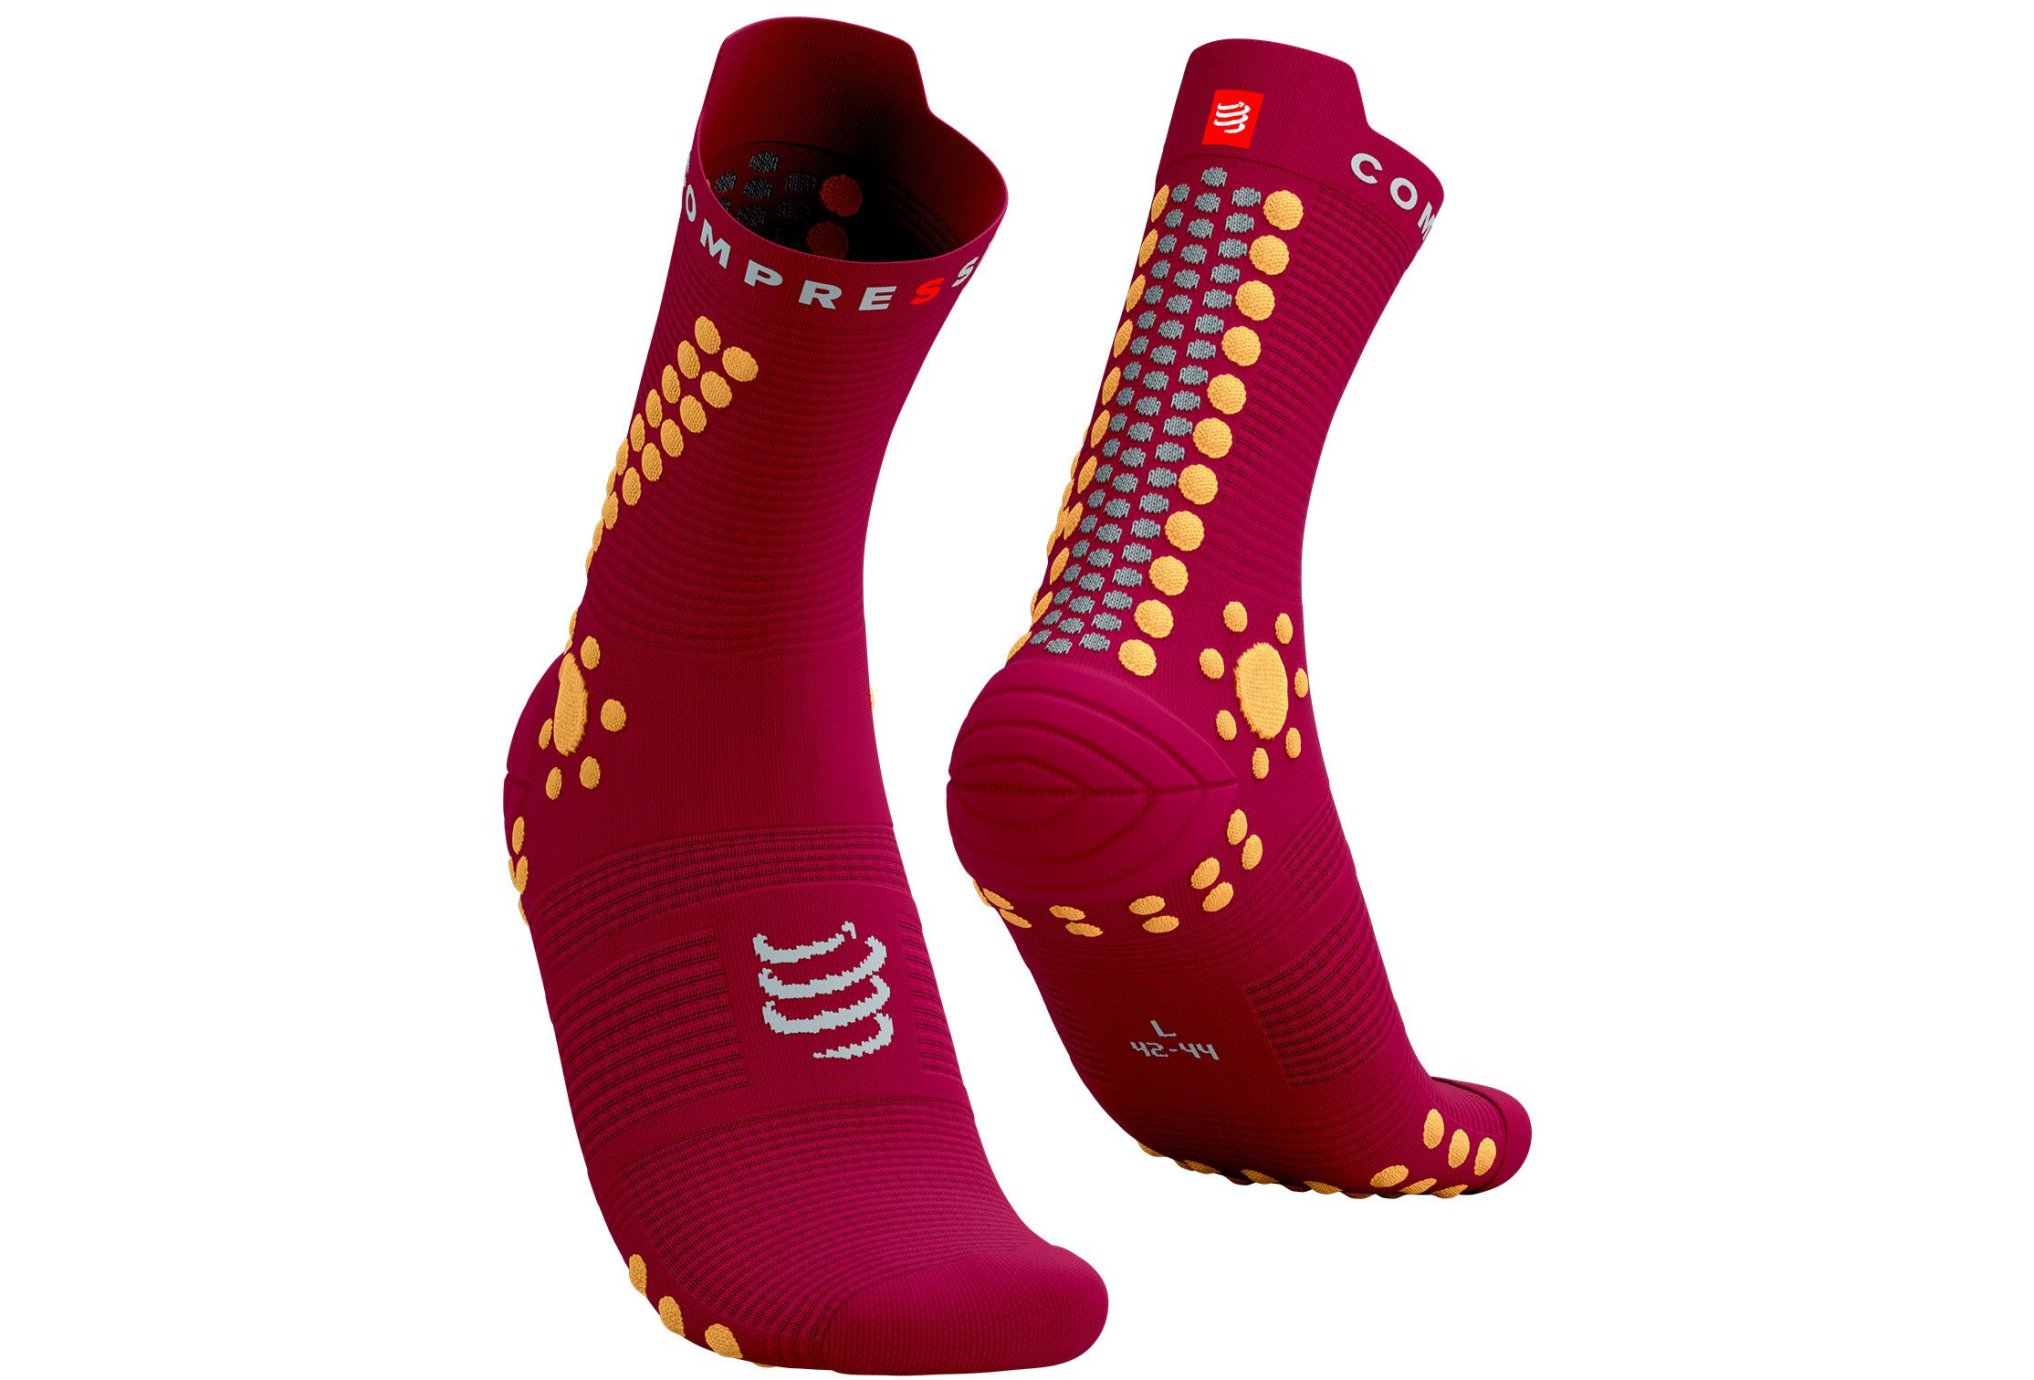 Compressport Pro Racing V 4.0 Trail Chaussettes